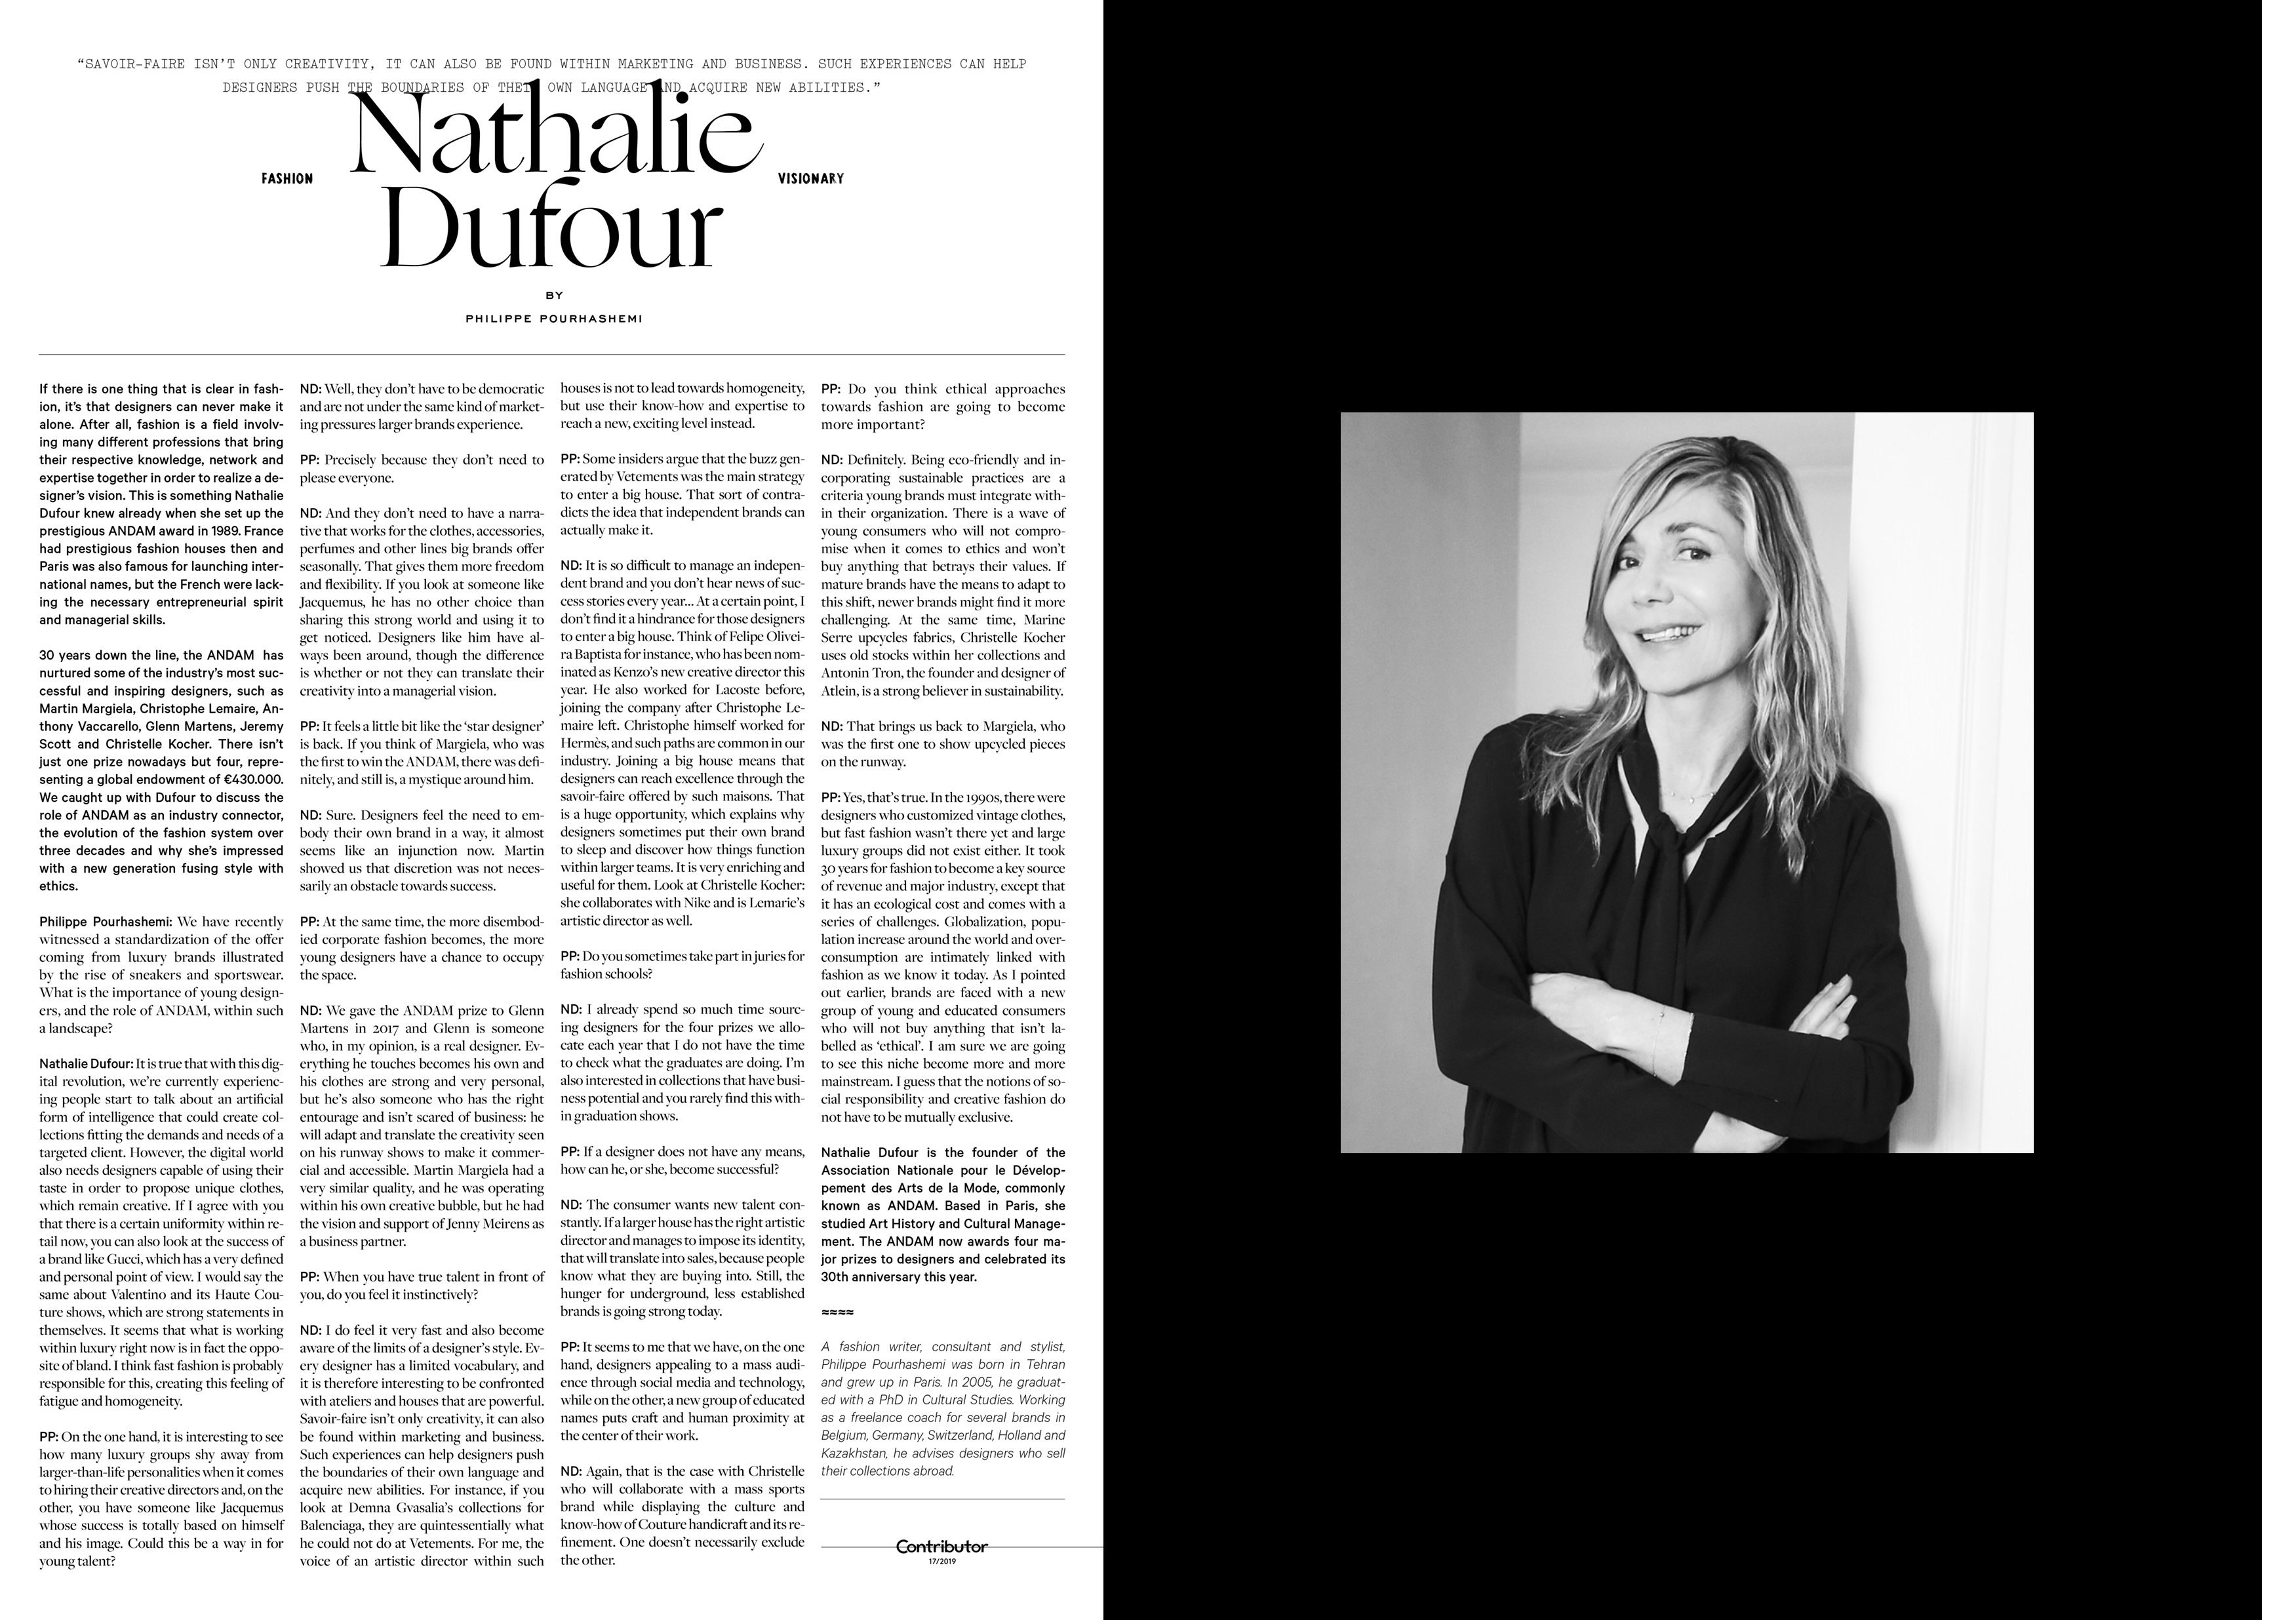 Fashion Visionary. Interview with Nathalie Dufour